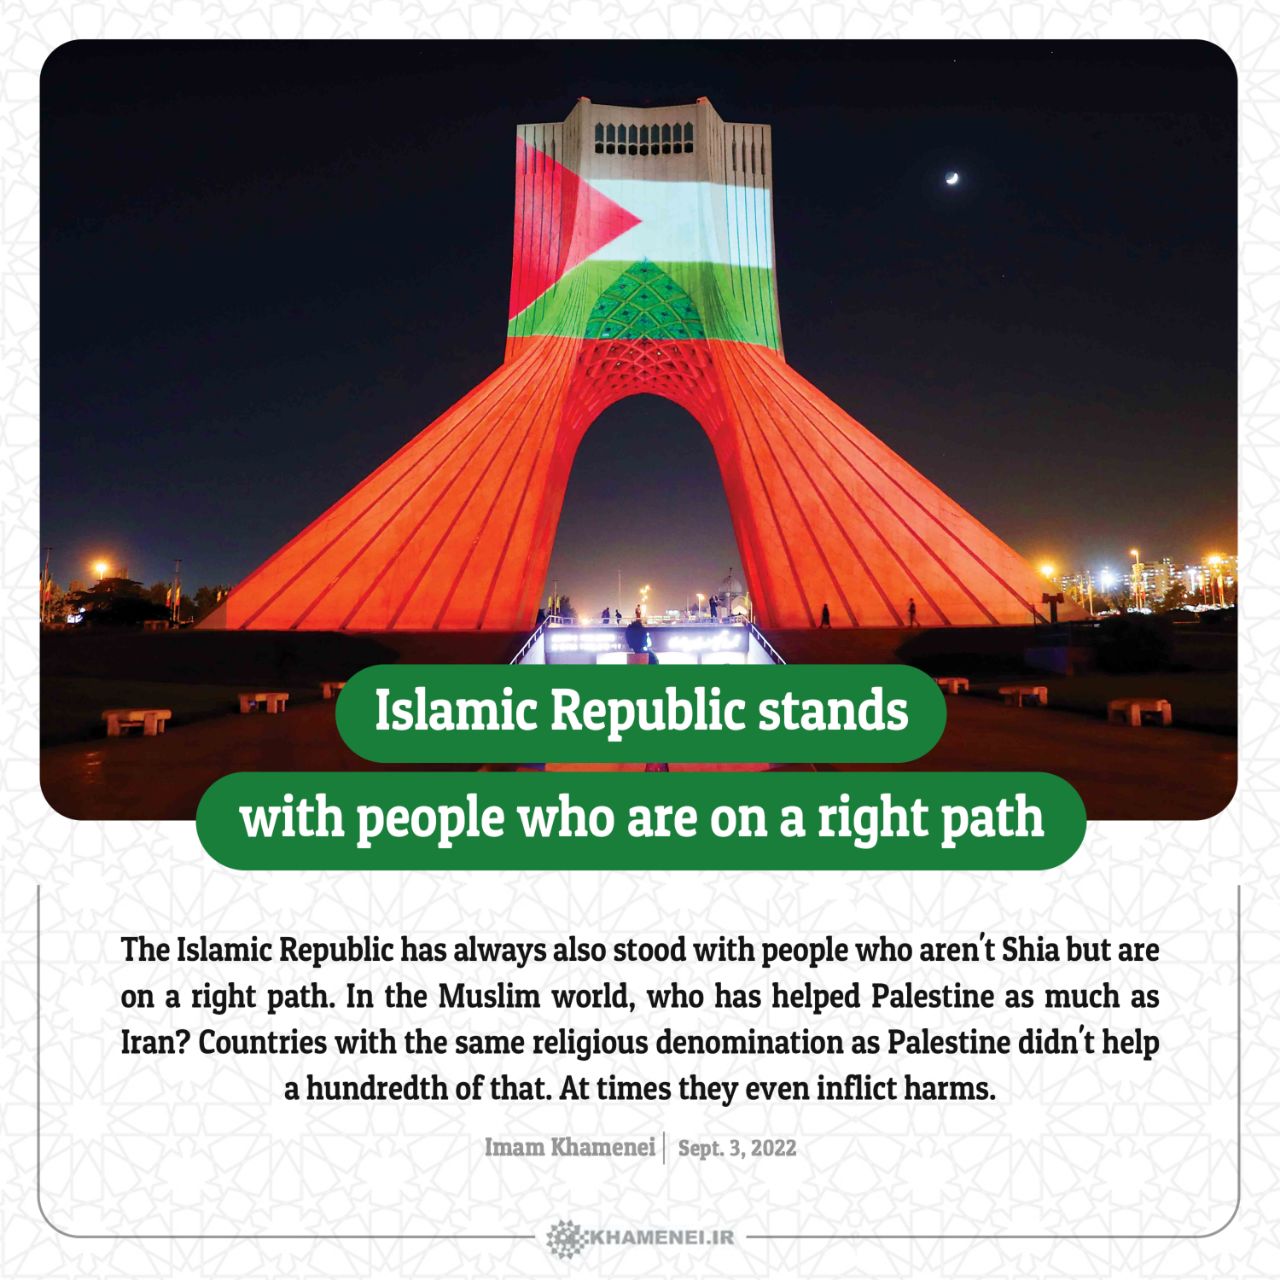 Islamic Republic stands with people who are on a right path